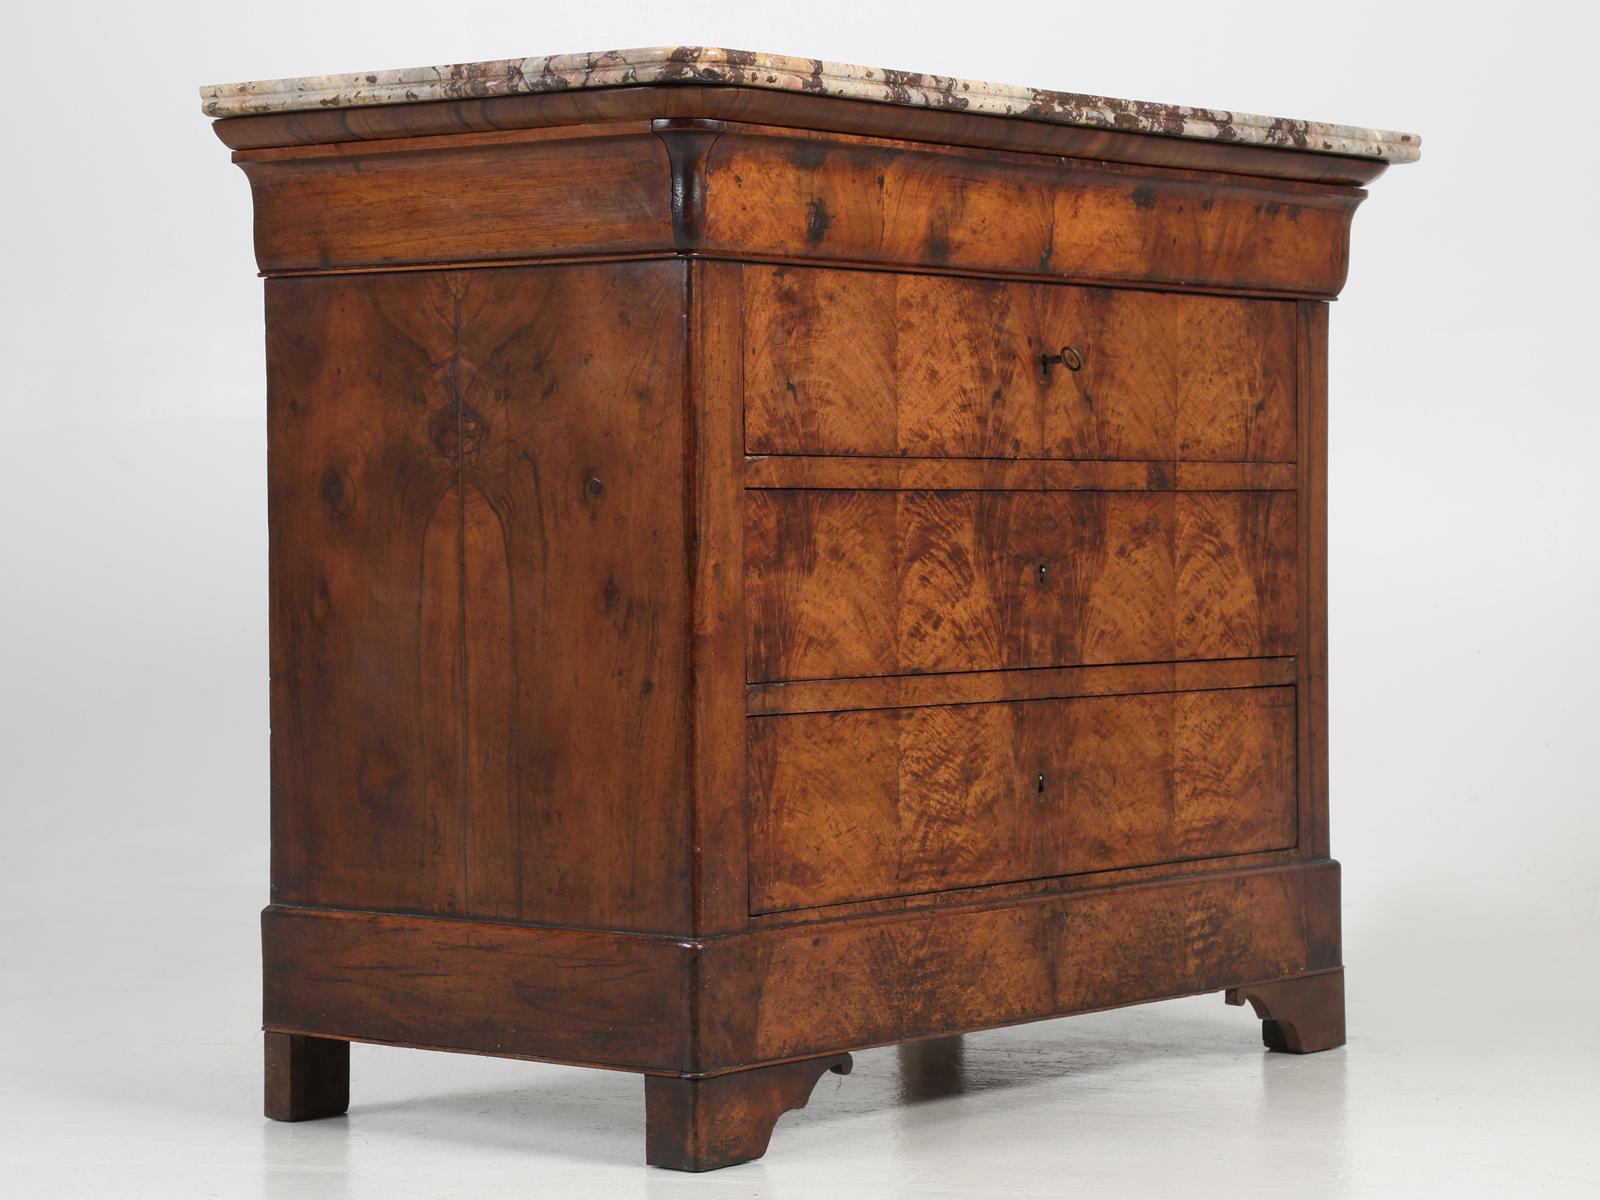 Antique French Louis Philippe style commode, constructed of bookmatched burl walnut, complimented by an exquisite piece of marble, which in itself is extremely rare to find. This particular antique French commode, was discovered in the small town of